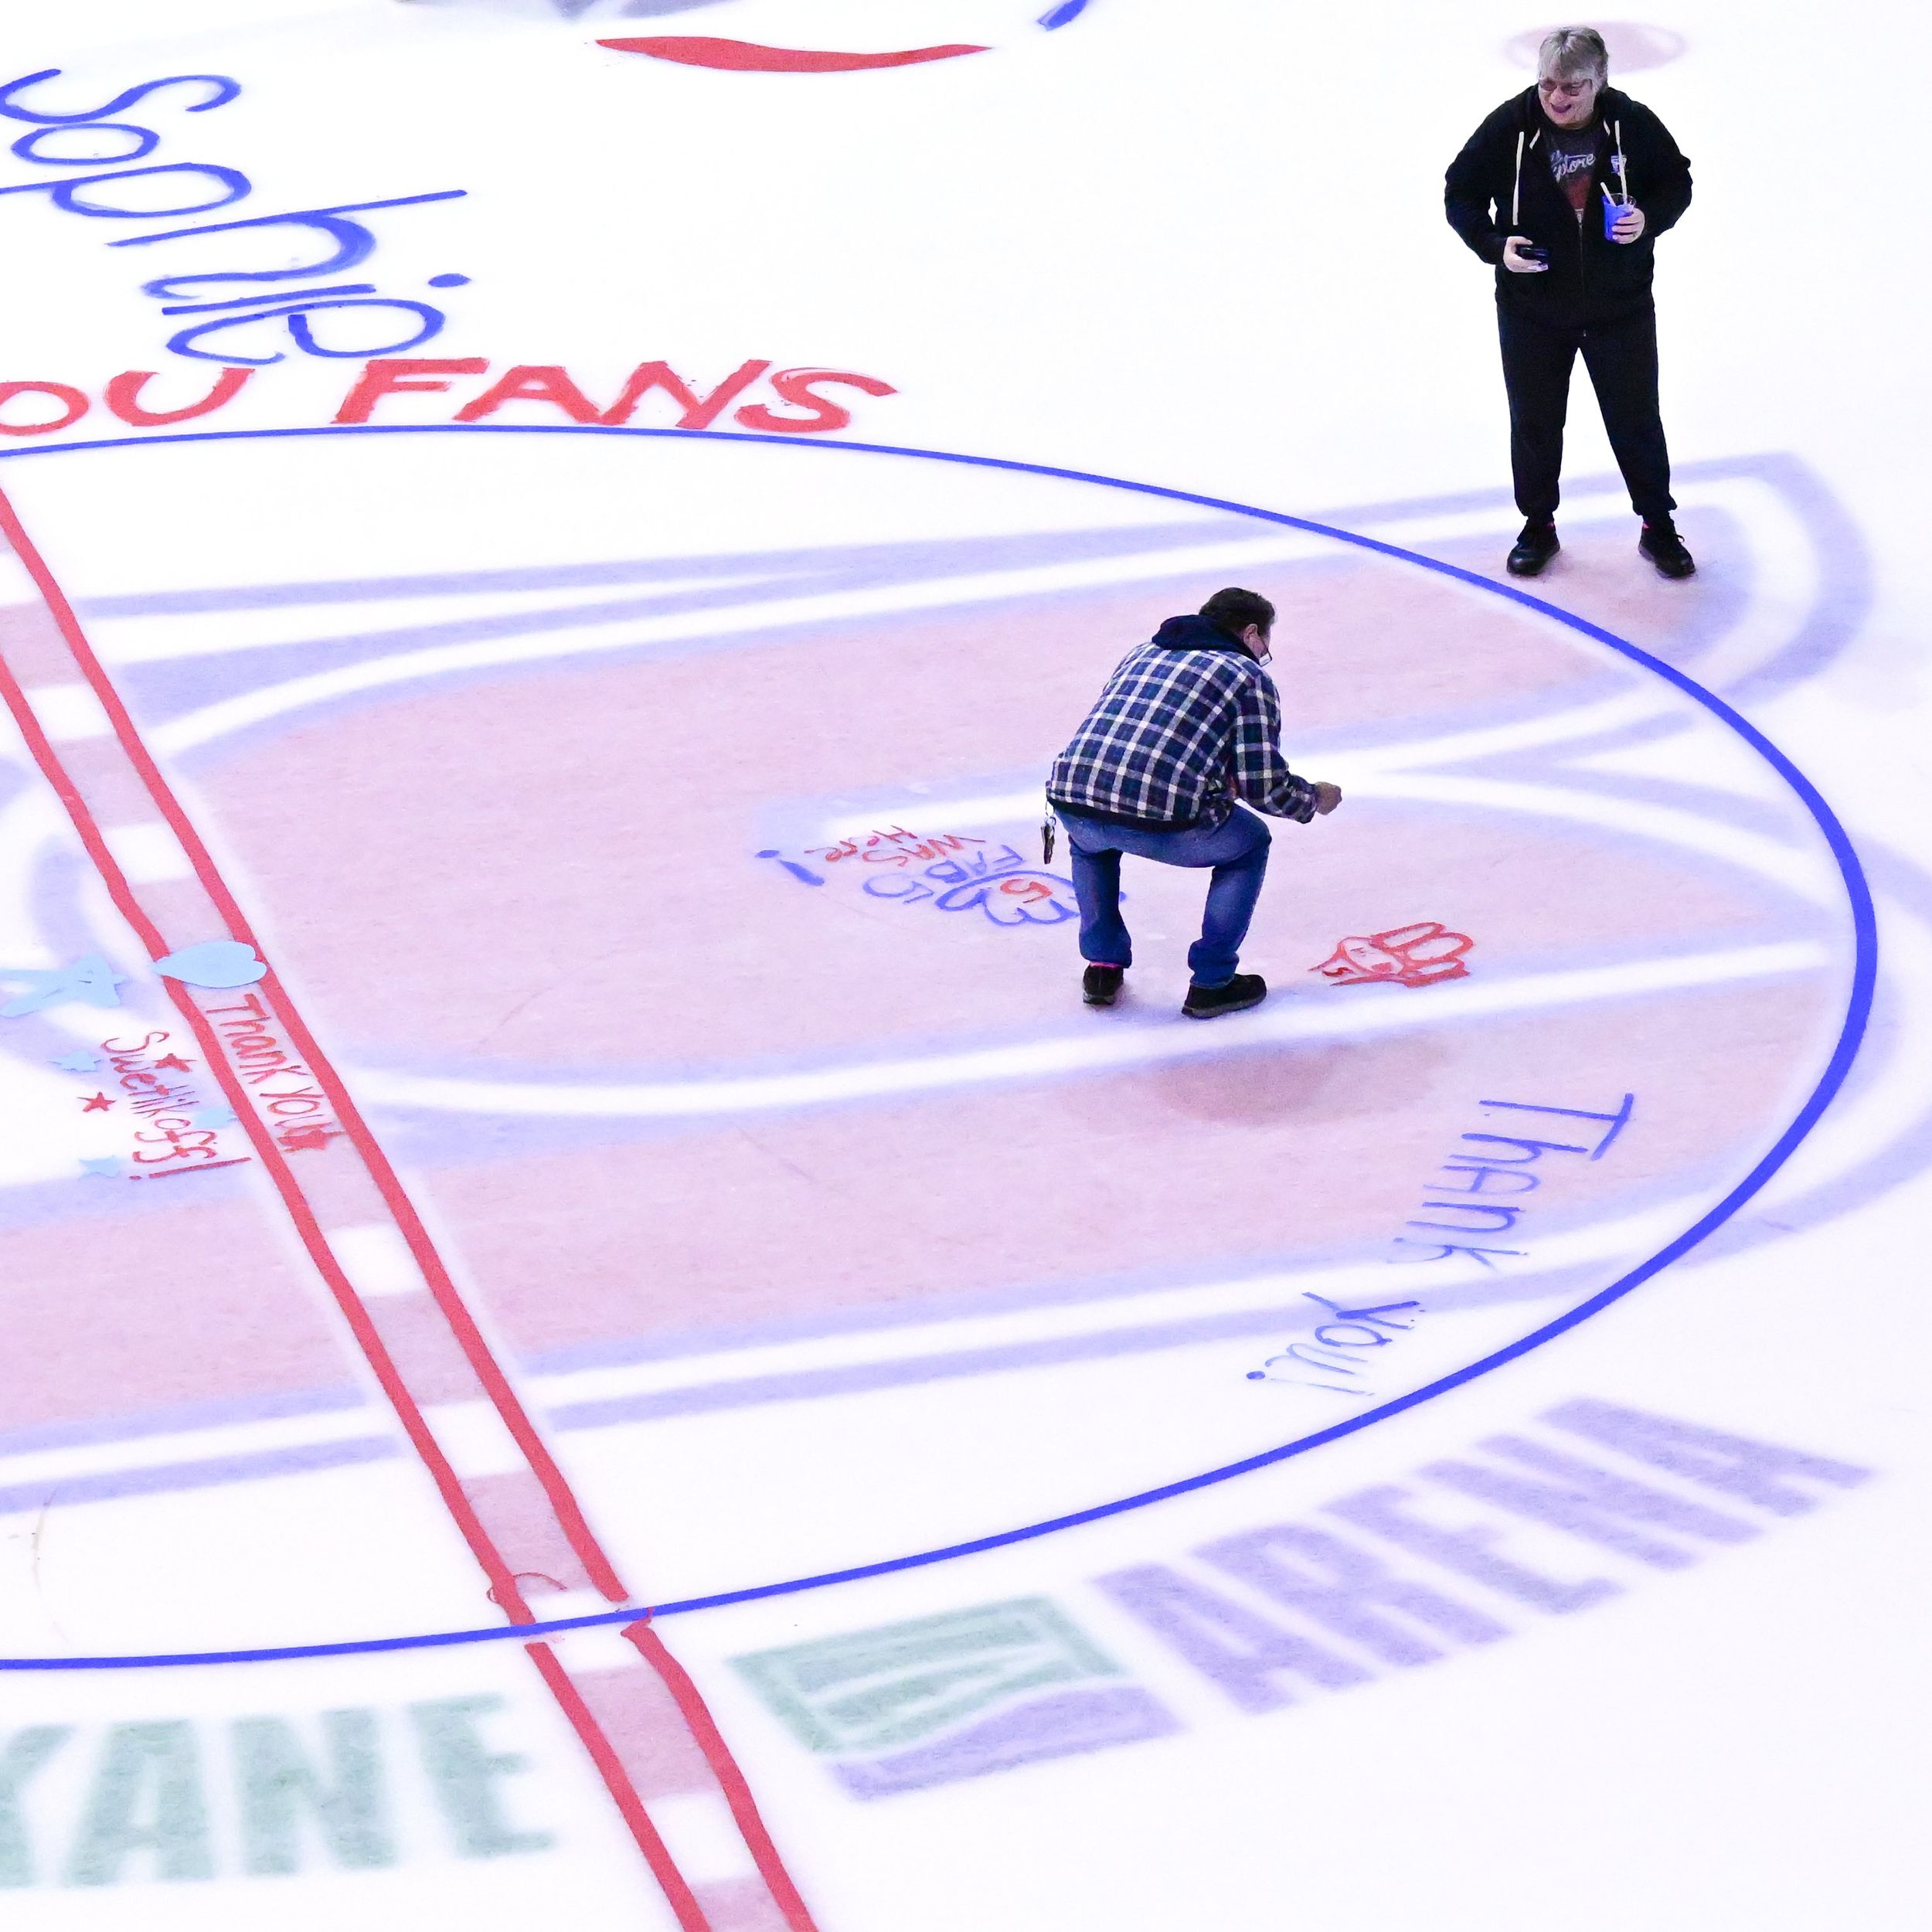 The best of the Colorado Avalanche season end Paint-the-Ice event